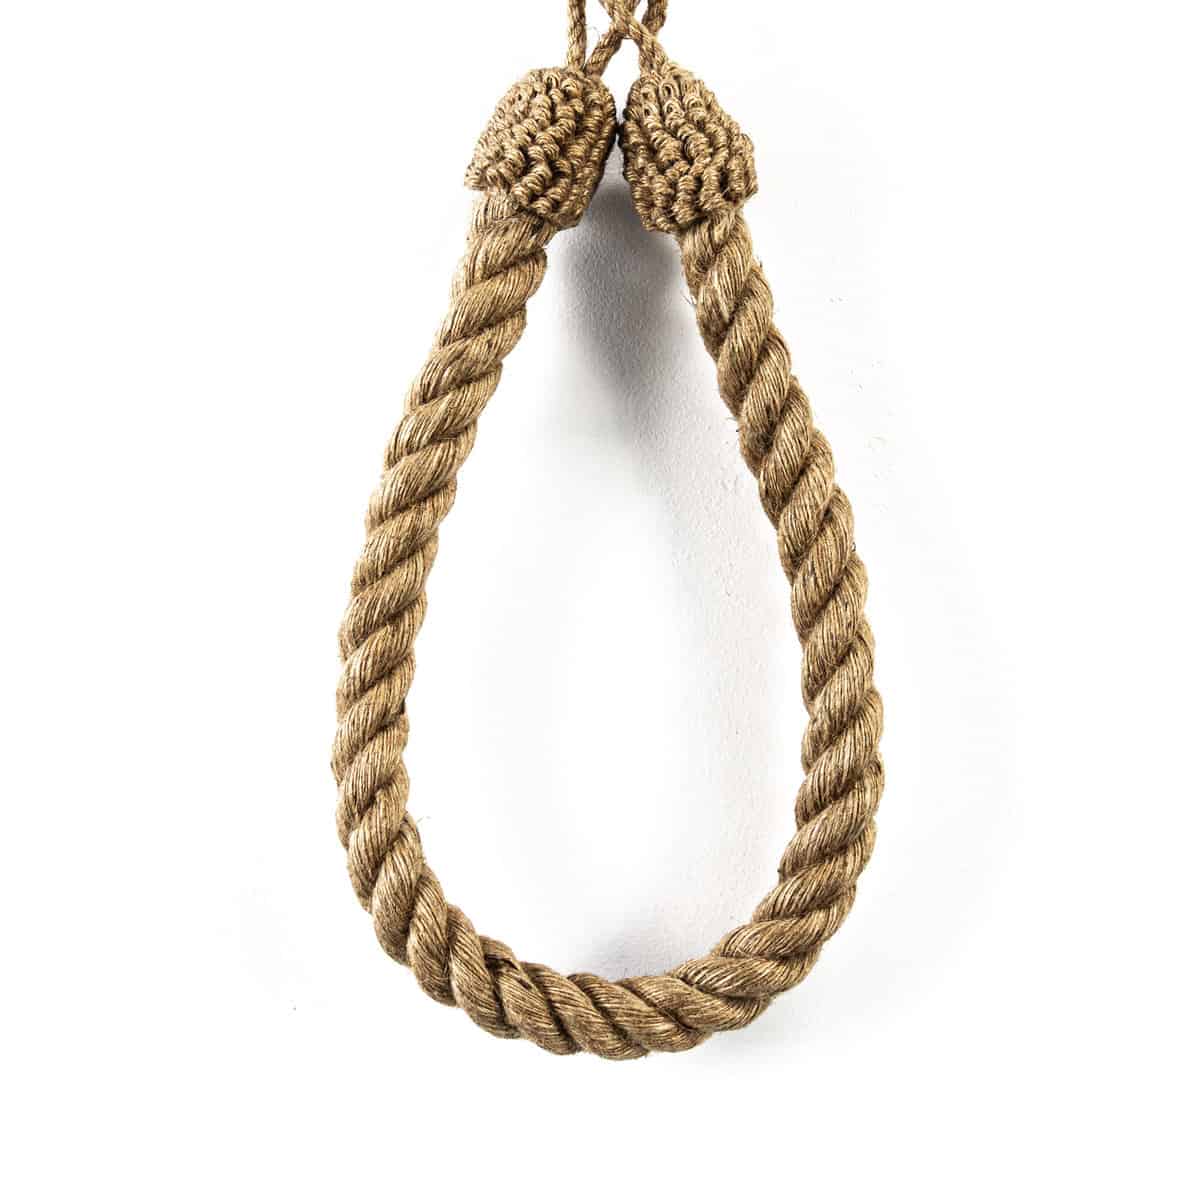 Hanging Rope Knot Tied Isolated On White Stock Image Image Of Security,  Connection: 214690635